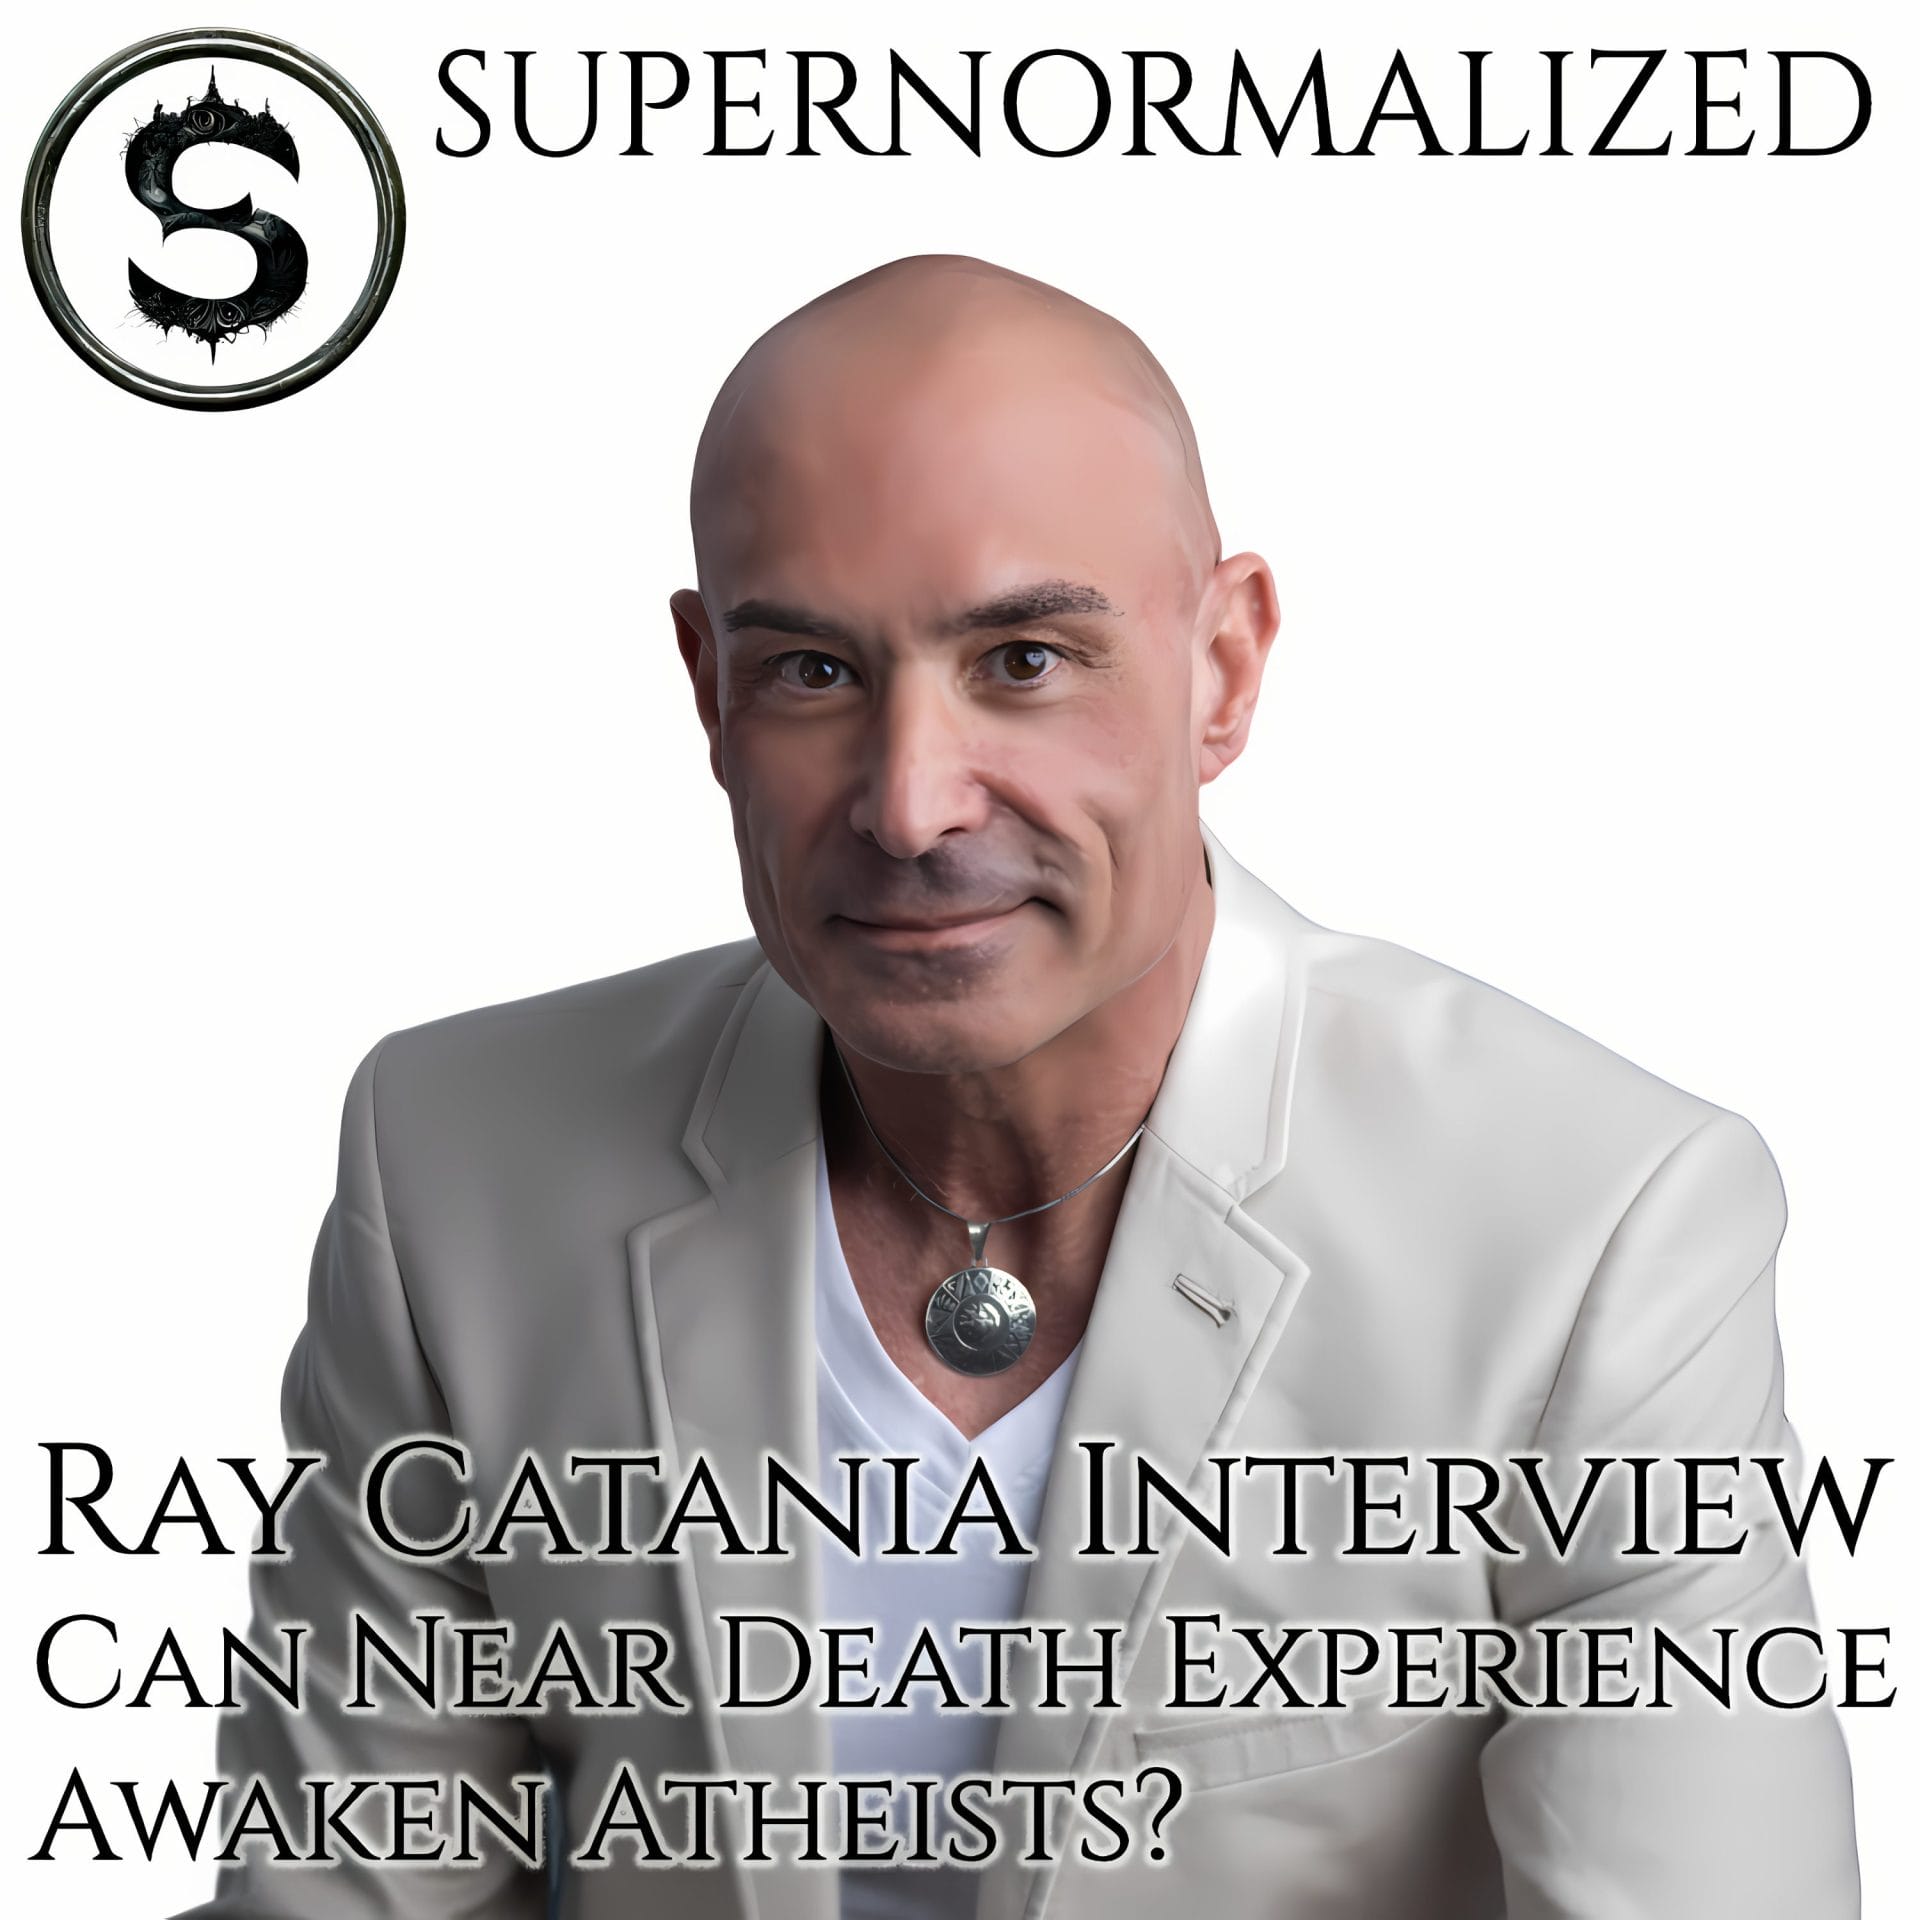 Ray Catania Interview Can Near Death Experience Awaken Atheists?